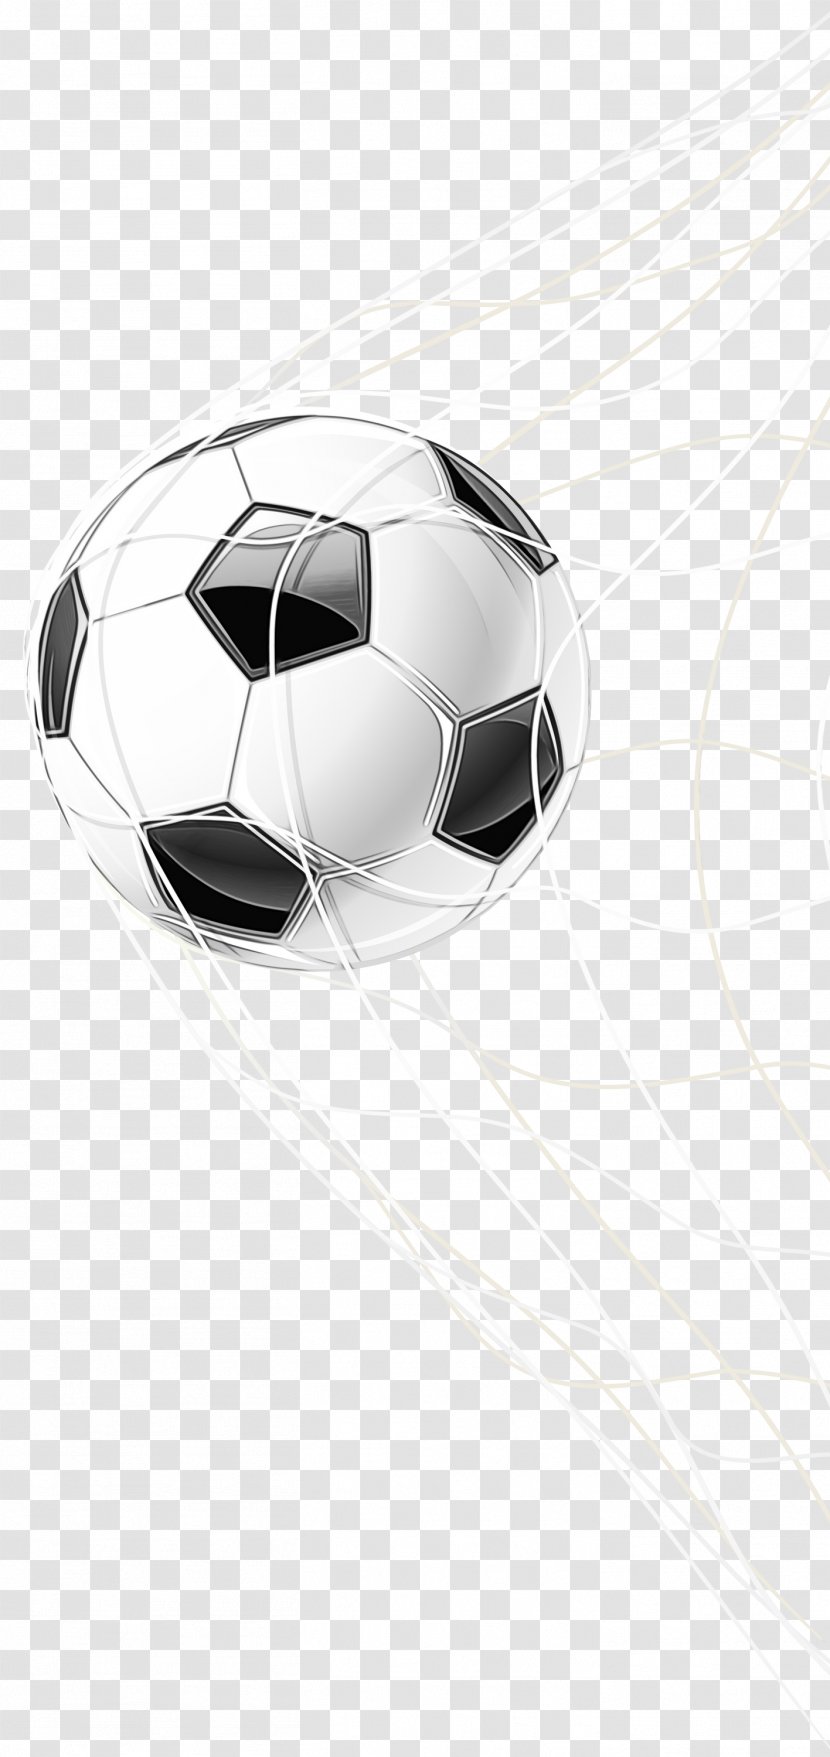 Soccer Ball - Sports Equipment - Sphere Pallone Transparent PNG